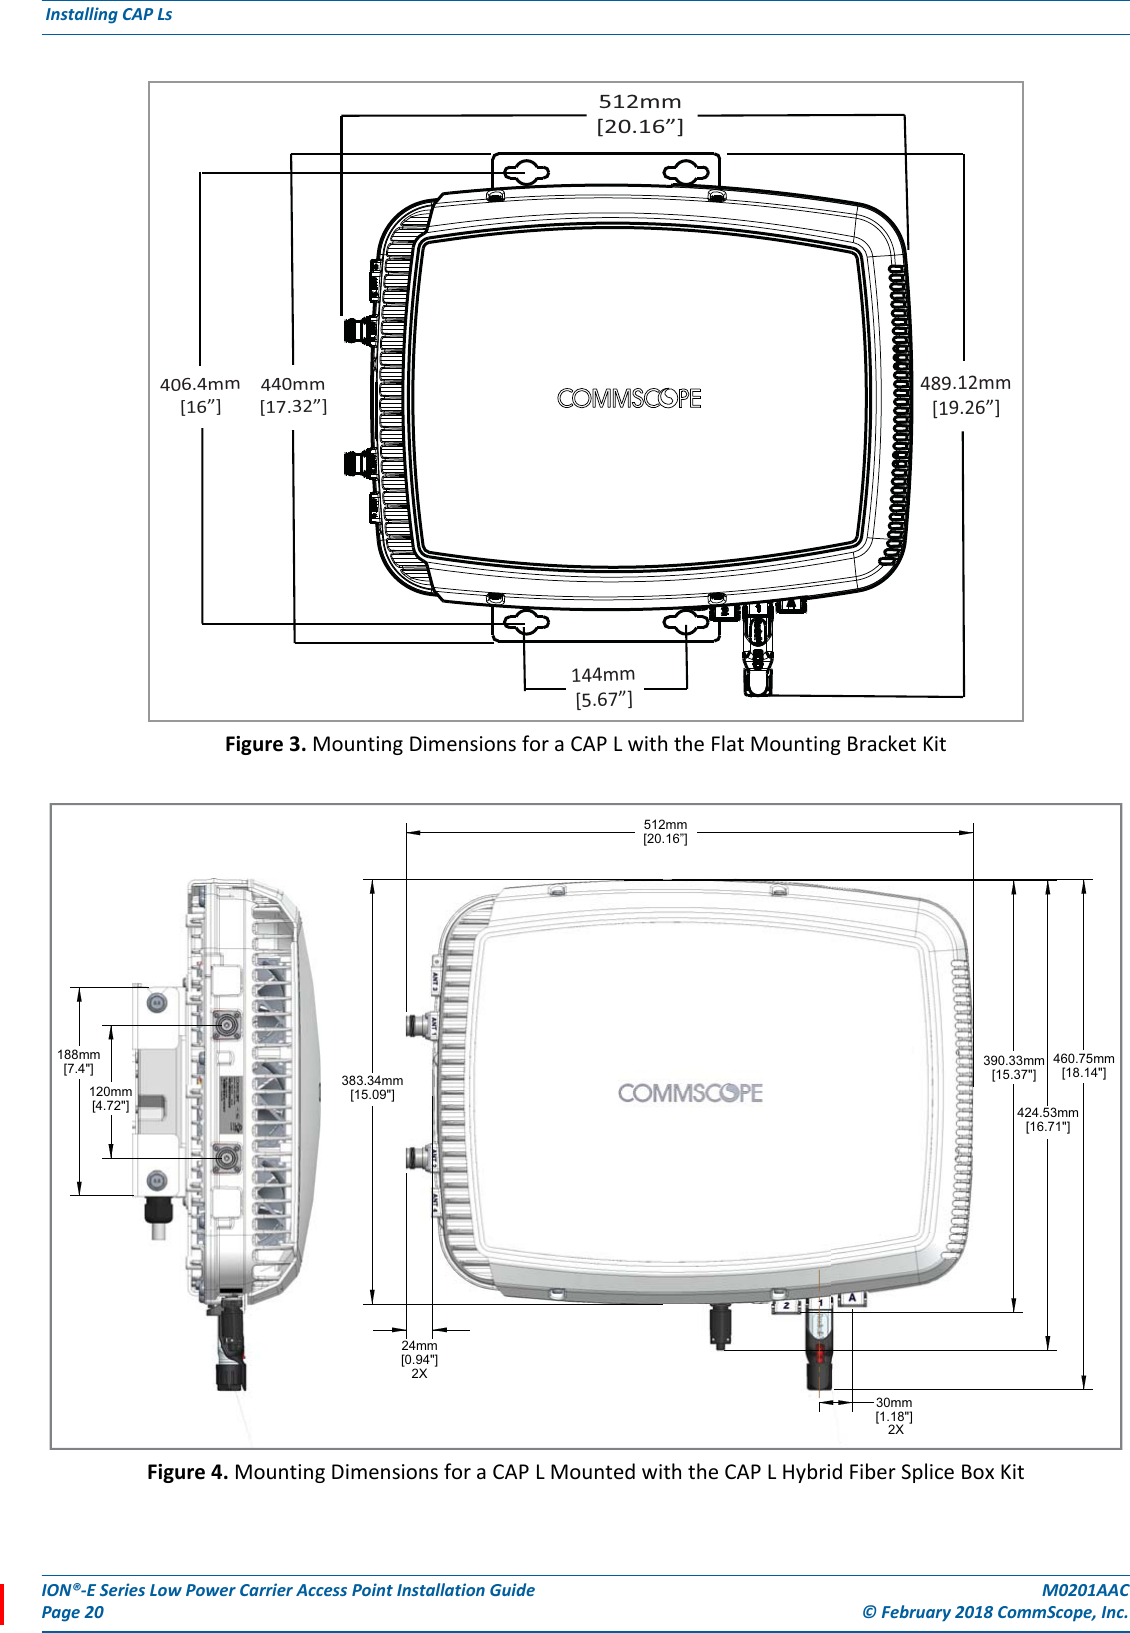 ION®-E Series Low Power Carrier Access Point Installation Guide M0201AACPage 20 © February 2018 CommScope, Inc. Installing CAP Ls  Figure 3. Mounting Dimensions for a CAP L with the Flat Mounting Bracket KitFigure 4. Mounting Dimensions for a CAP L Mounted with the CAP L Hybrid Fiber Splice Box Kit489.12mm[19.26”]512mm[20.16”]144mm[5.67”]440mm[17.32”]406.4mm[16”]120mm[4.72&quot;]383.34mm[15.09&quot;]512mm[20.16”]30mm 2X[1.18&quot;]424.53mm[16.71&quot;]390.33mm[15.37&quot;]24mm[0.94&quot;]2X188mm[7.4&quot;] 460.75mm[18.14&quot;]